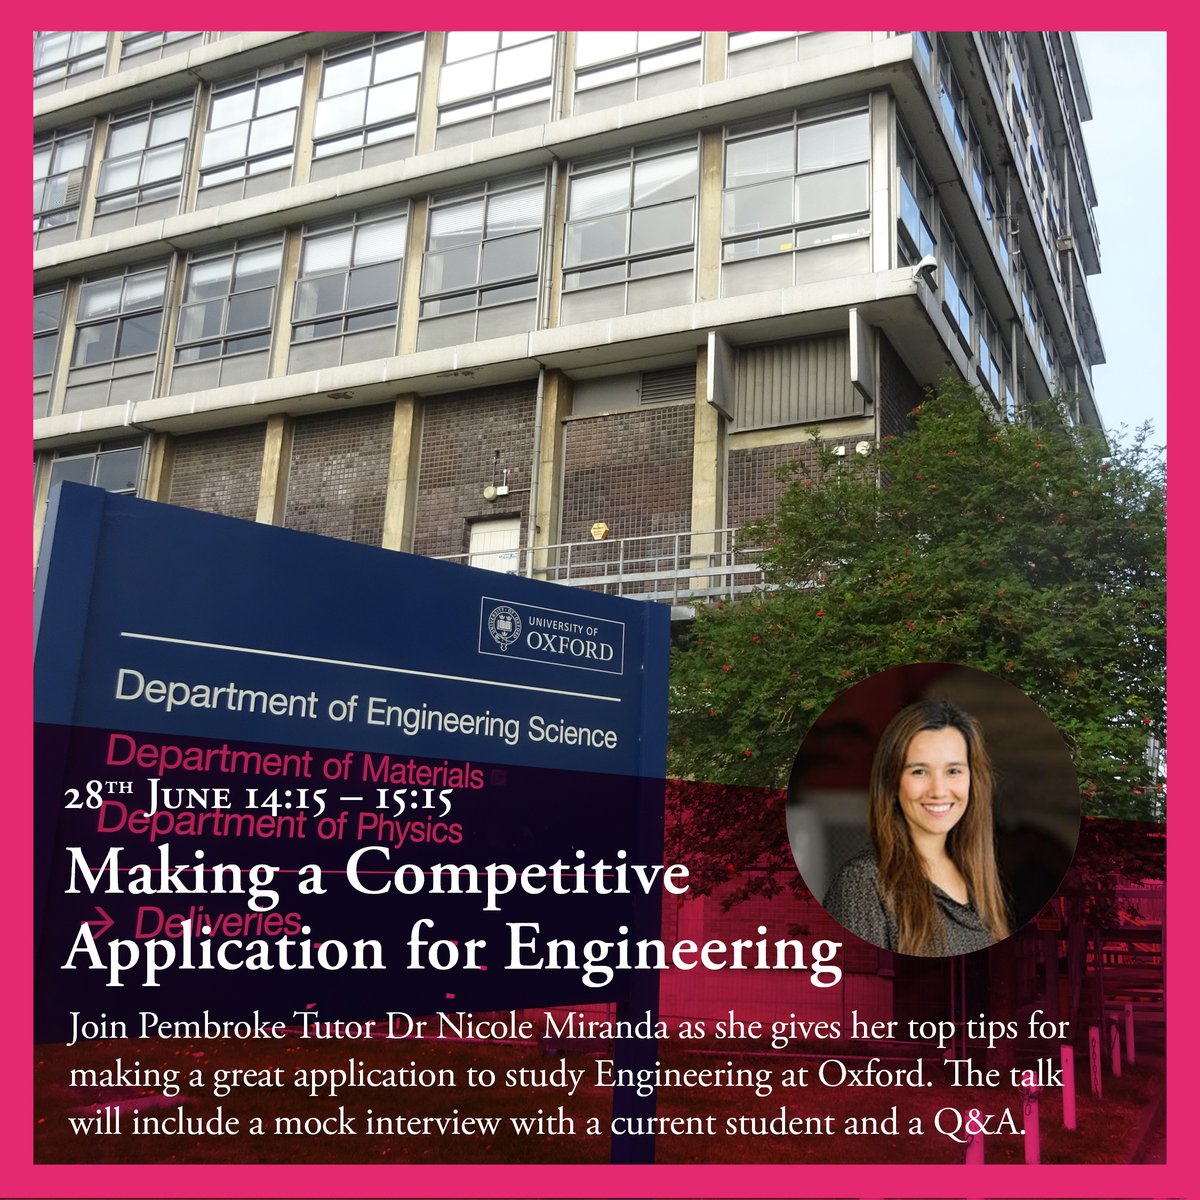 Are you thinking about applying to study Engineering at the @UniofOxford? Then don't miss Dr Nicole Miranda's talk on the 28th June! She will be giving her top tips for making a competitive application for Engineering, followed by a Q&A. 👉Sign up here: rb.gy/x4z2d